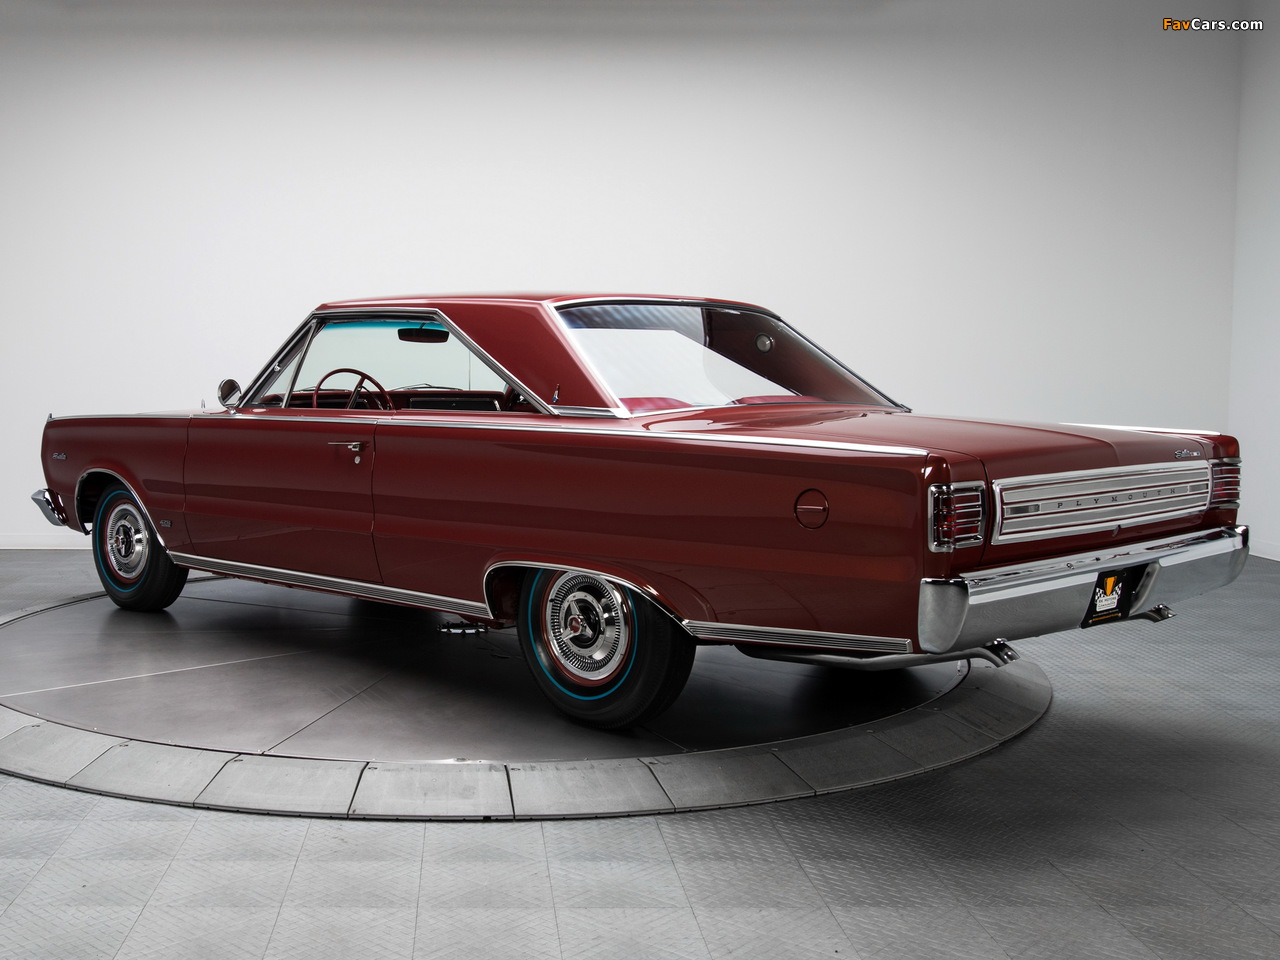 Pictures of Plymouth Belvedere Satellite 426 Hemi Hardtop Coupe (RP23) 1966 (1280 x 960)